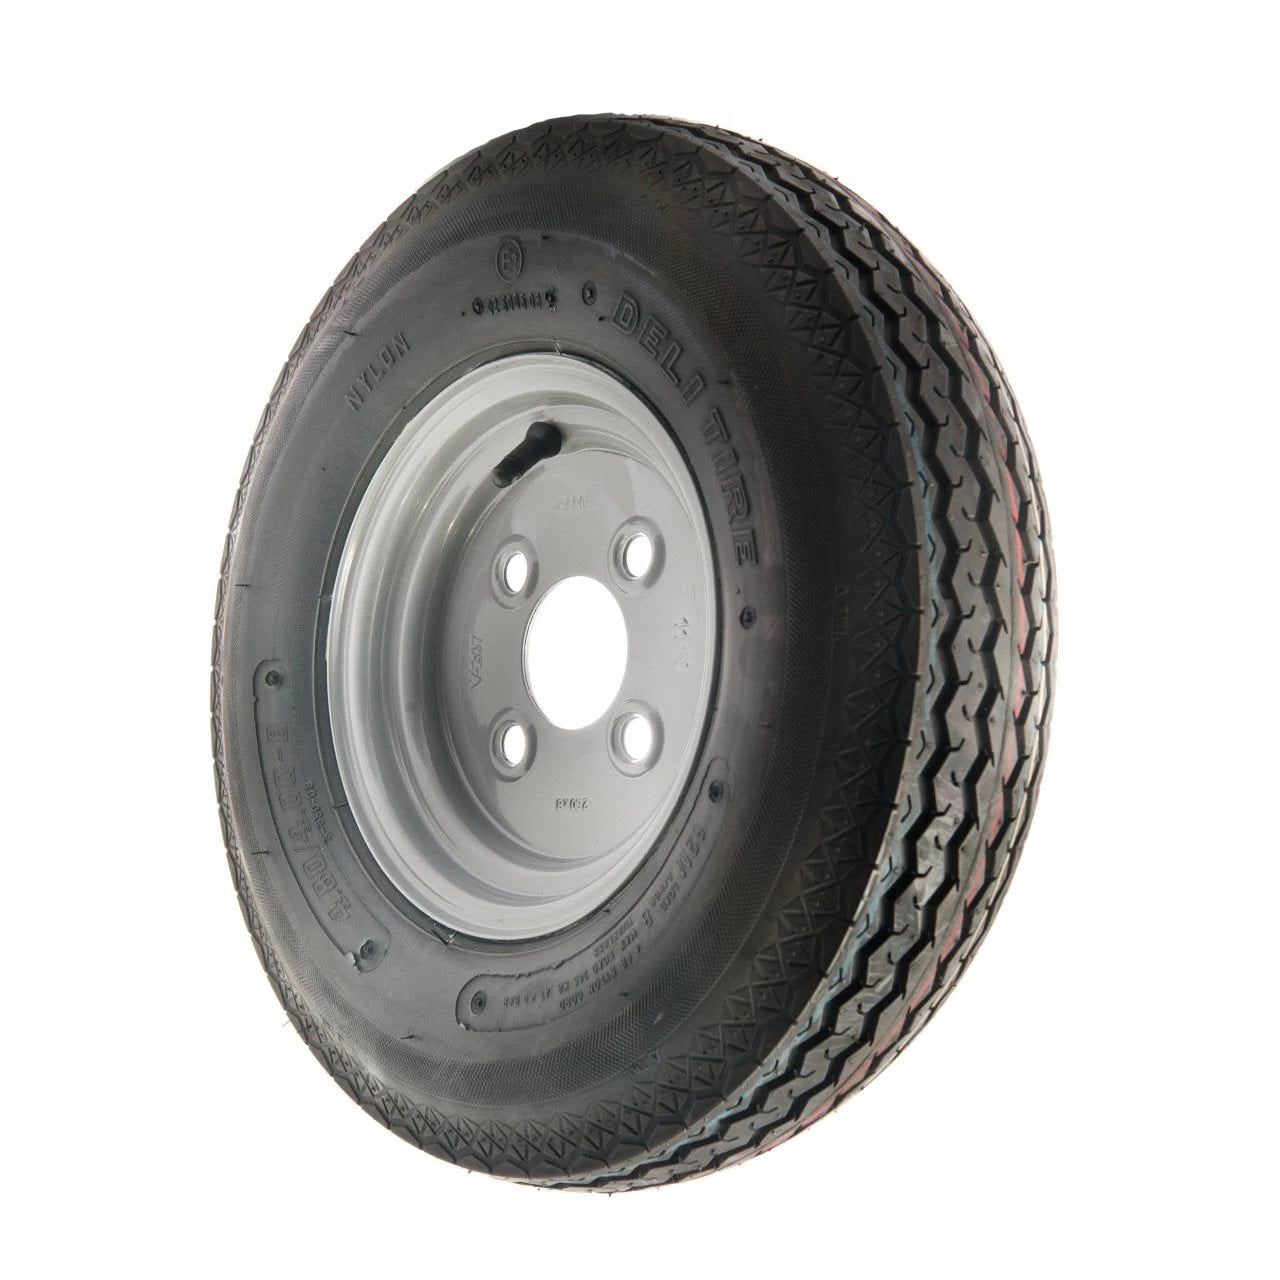 4.80/4.00 x 8 Trailer Wheel and Tyre 100mm PCD 6 Ply Tyre